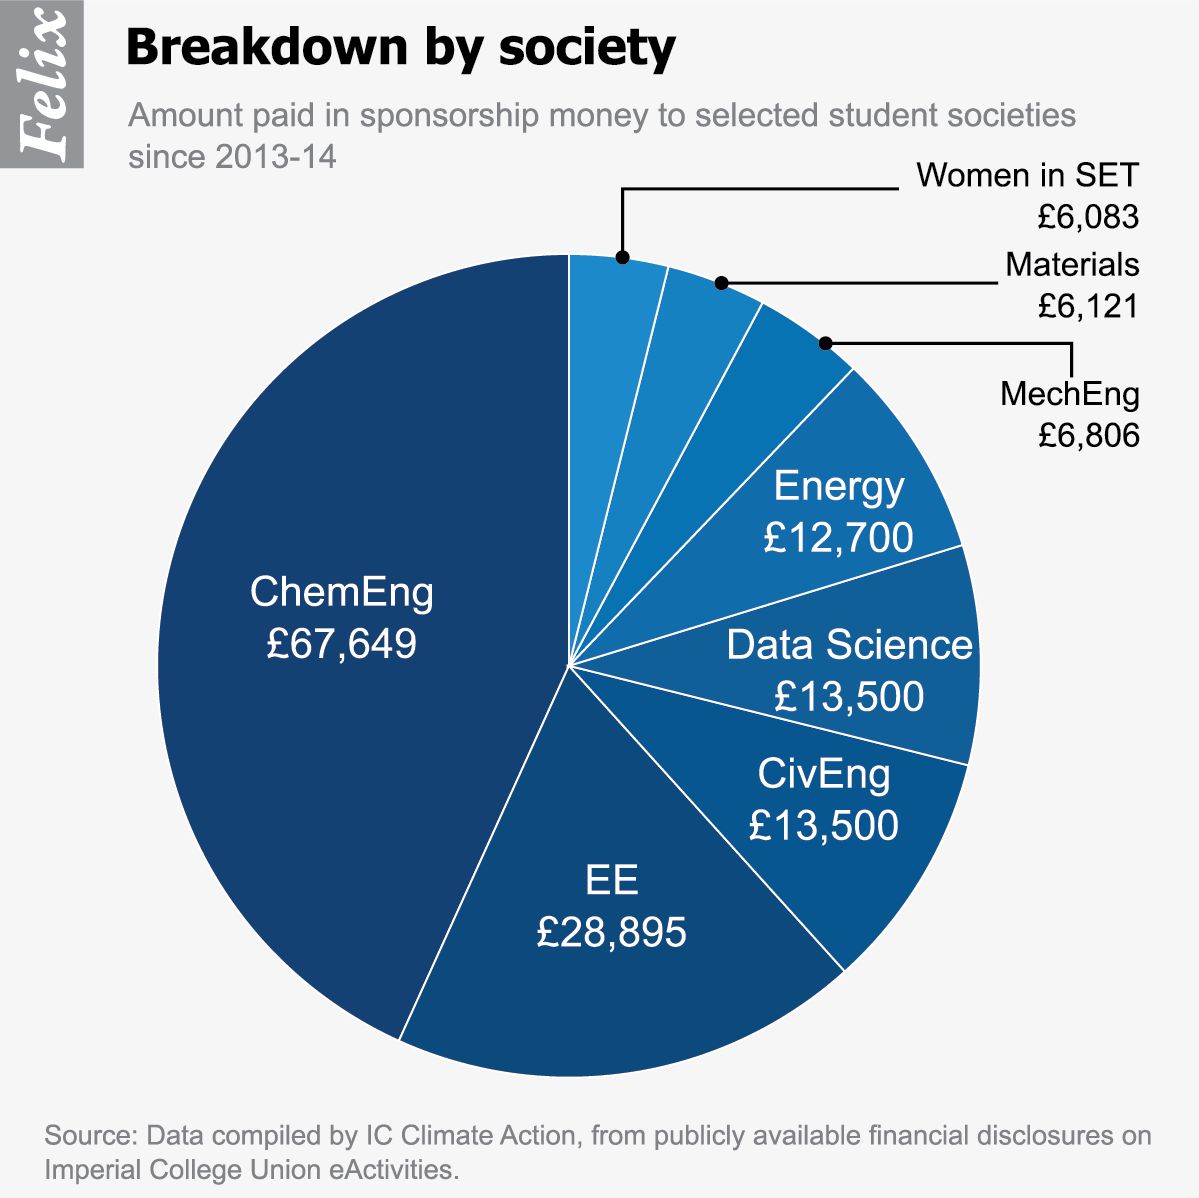 Big Oil has given Imperial societies over £150k since 2013-14